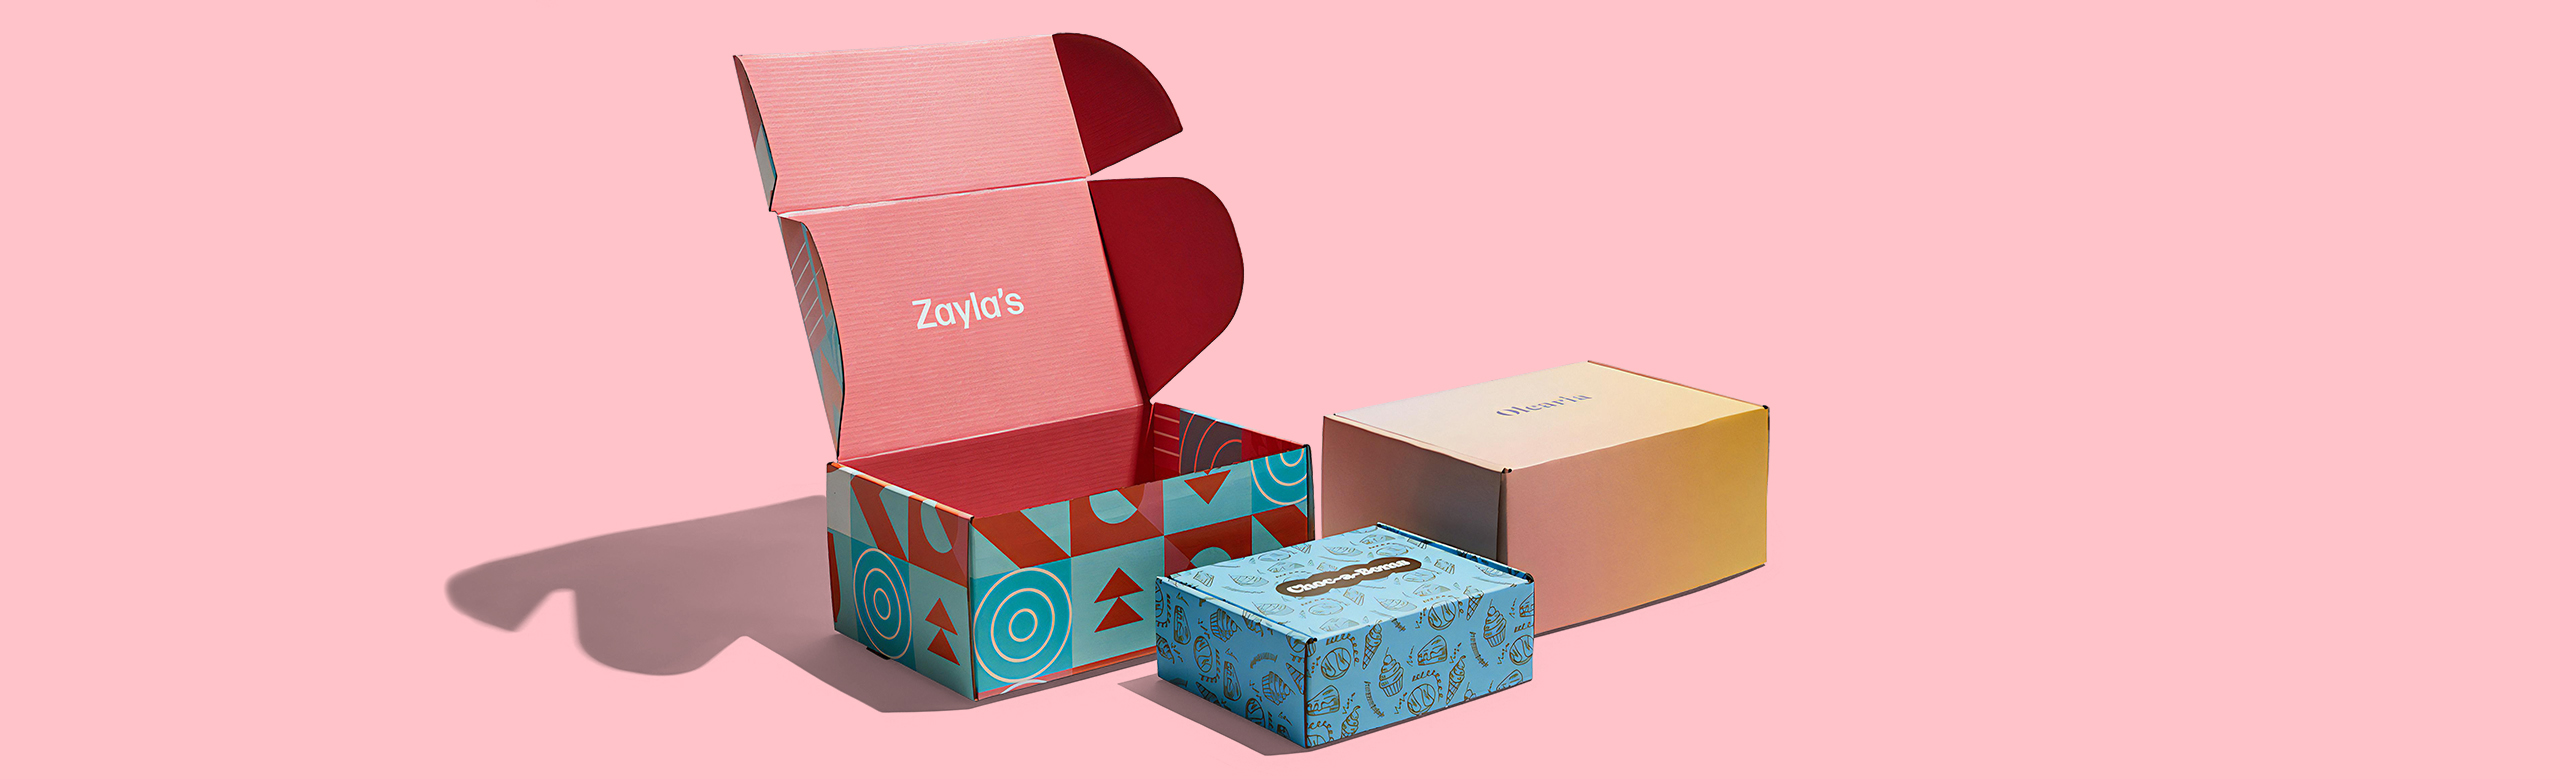 Optimize sample packaging boxes for shipping and presentation